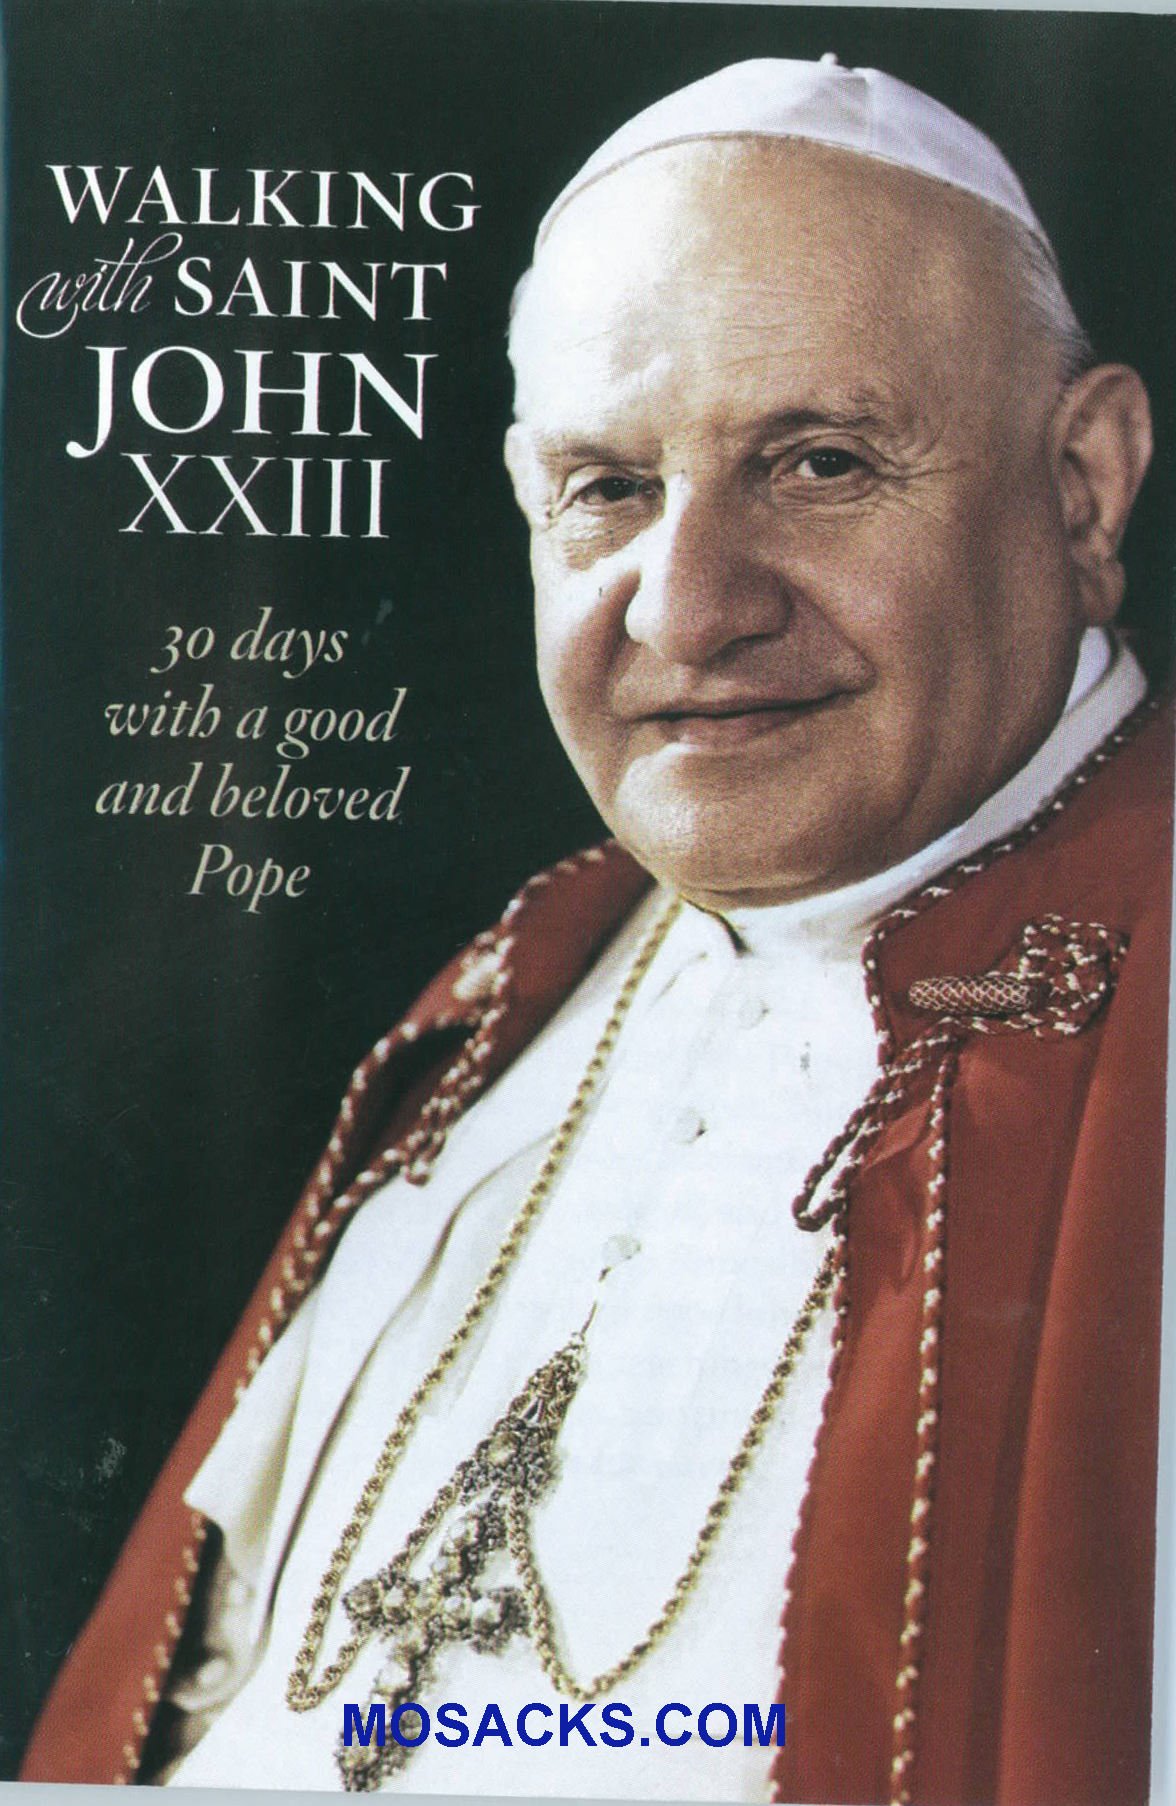 Walking with Saint John XXIII: 30 Days with a Good and Beloved Pope 9781627850056